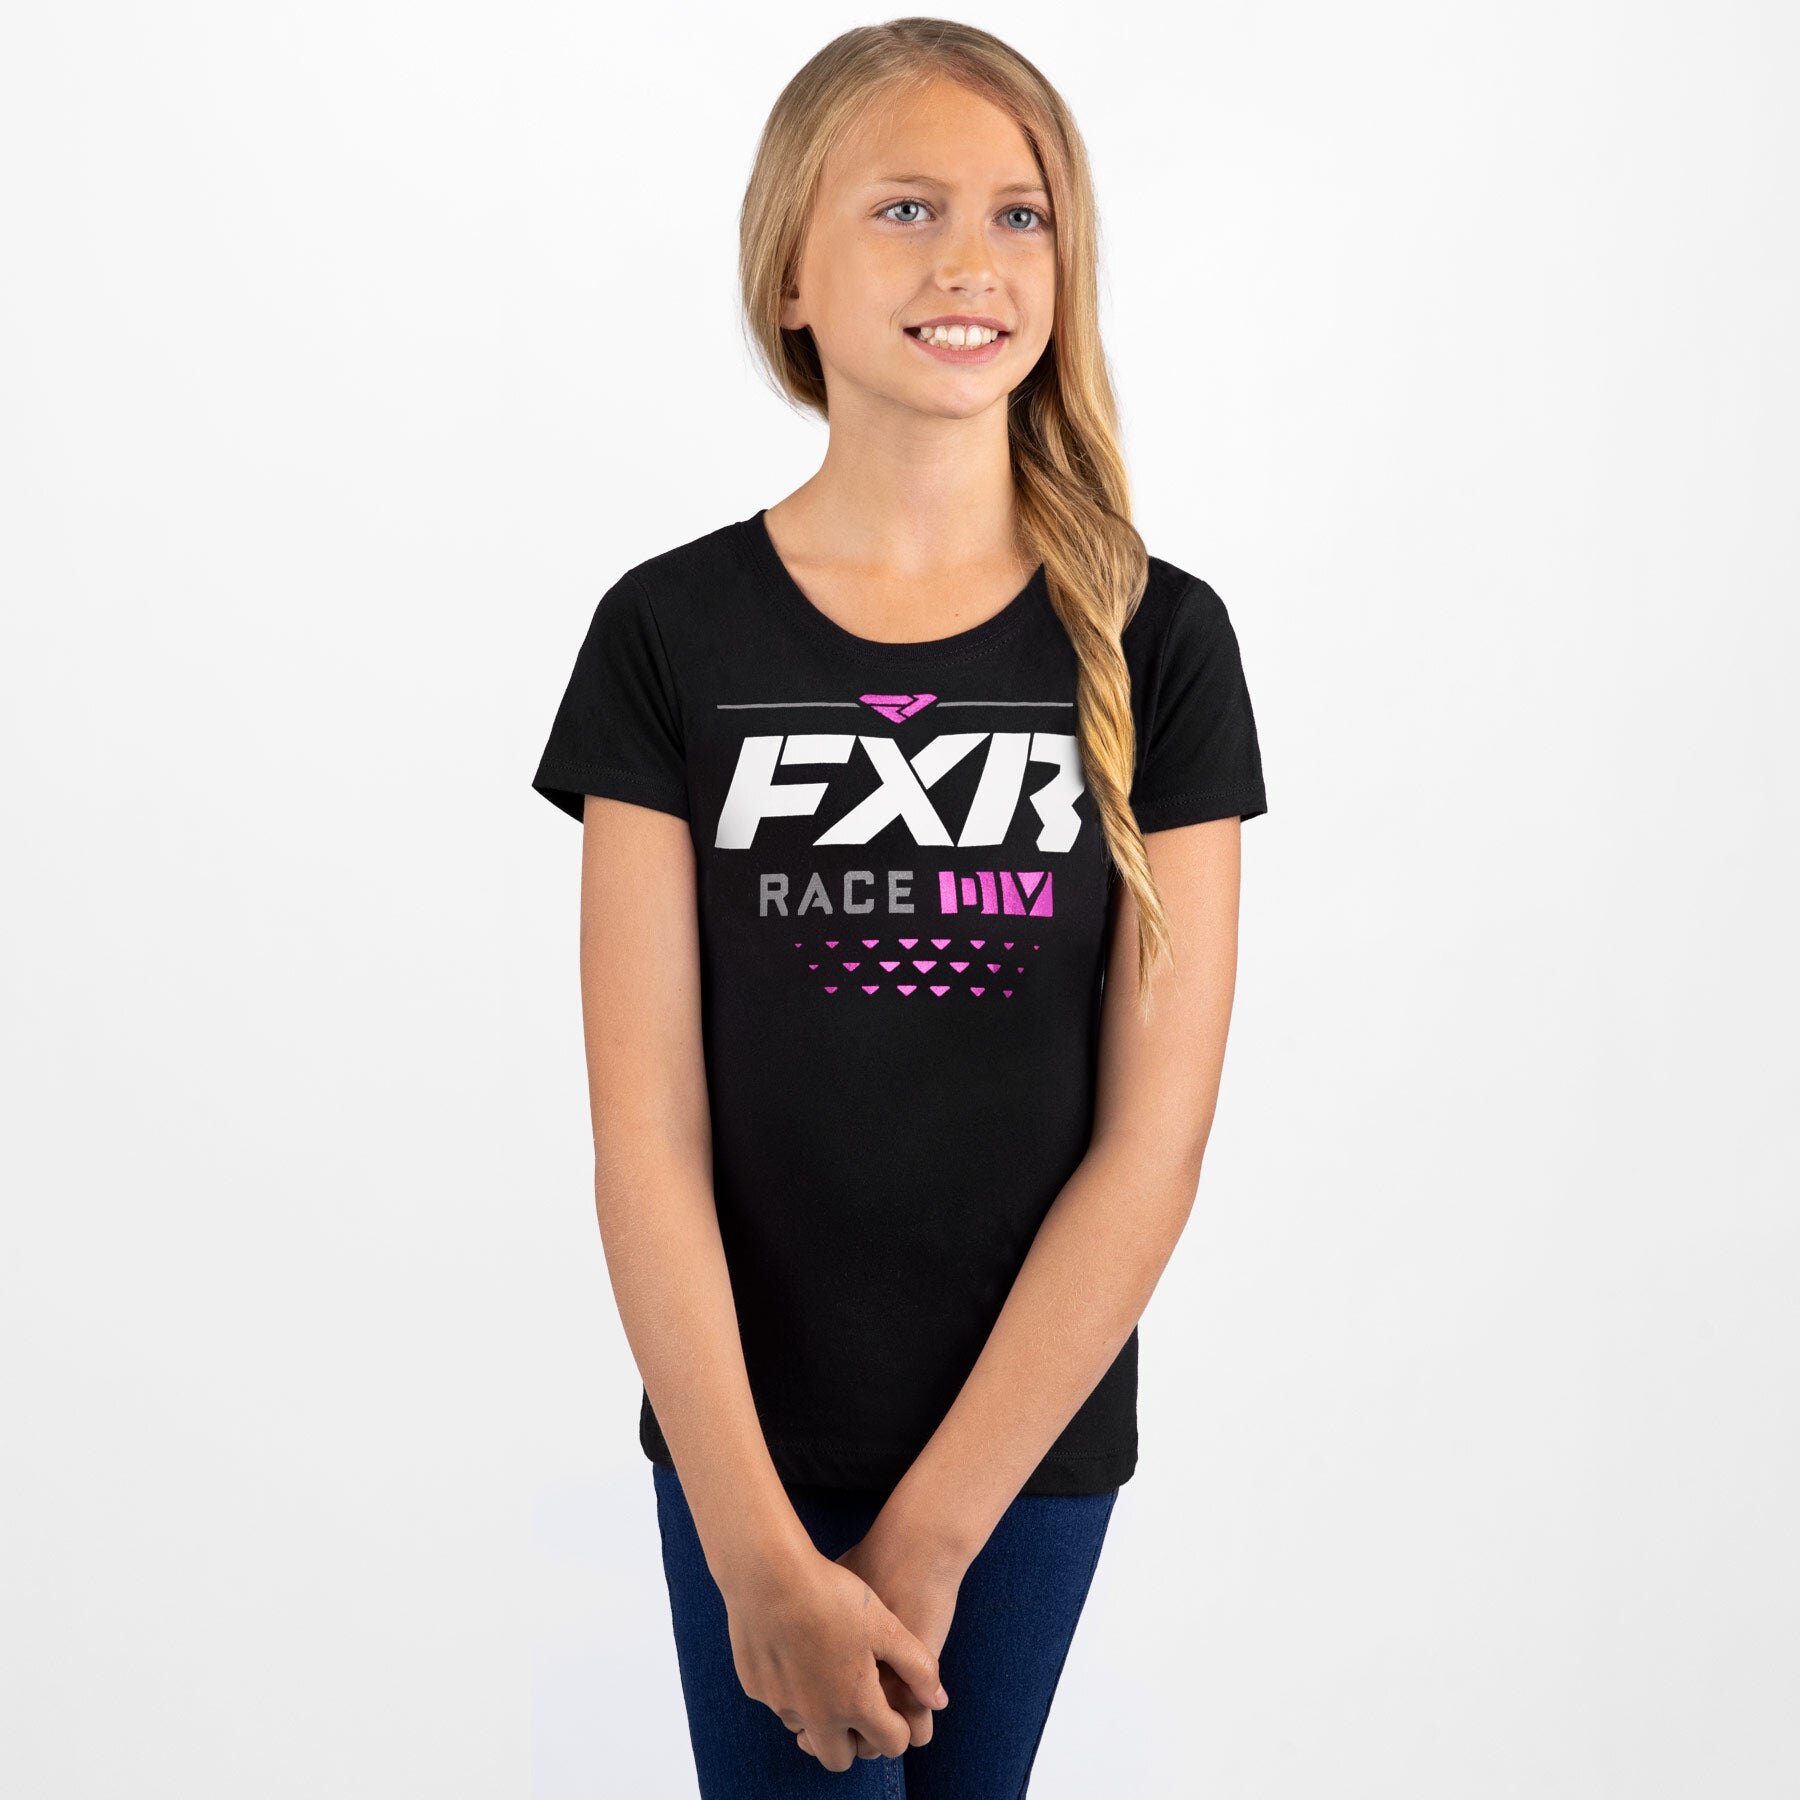 Youth Race Division T Shirt S Black/Elec Pink